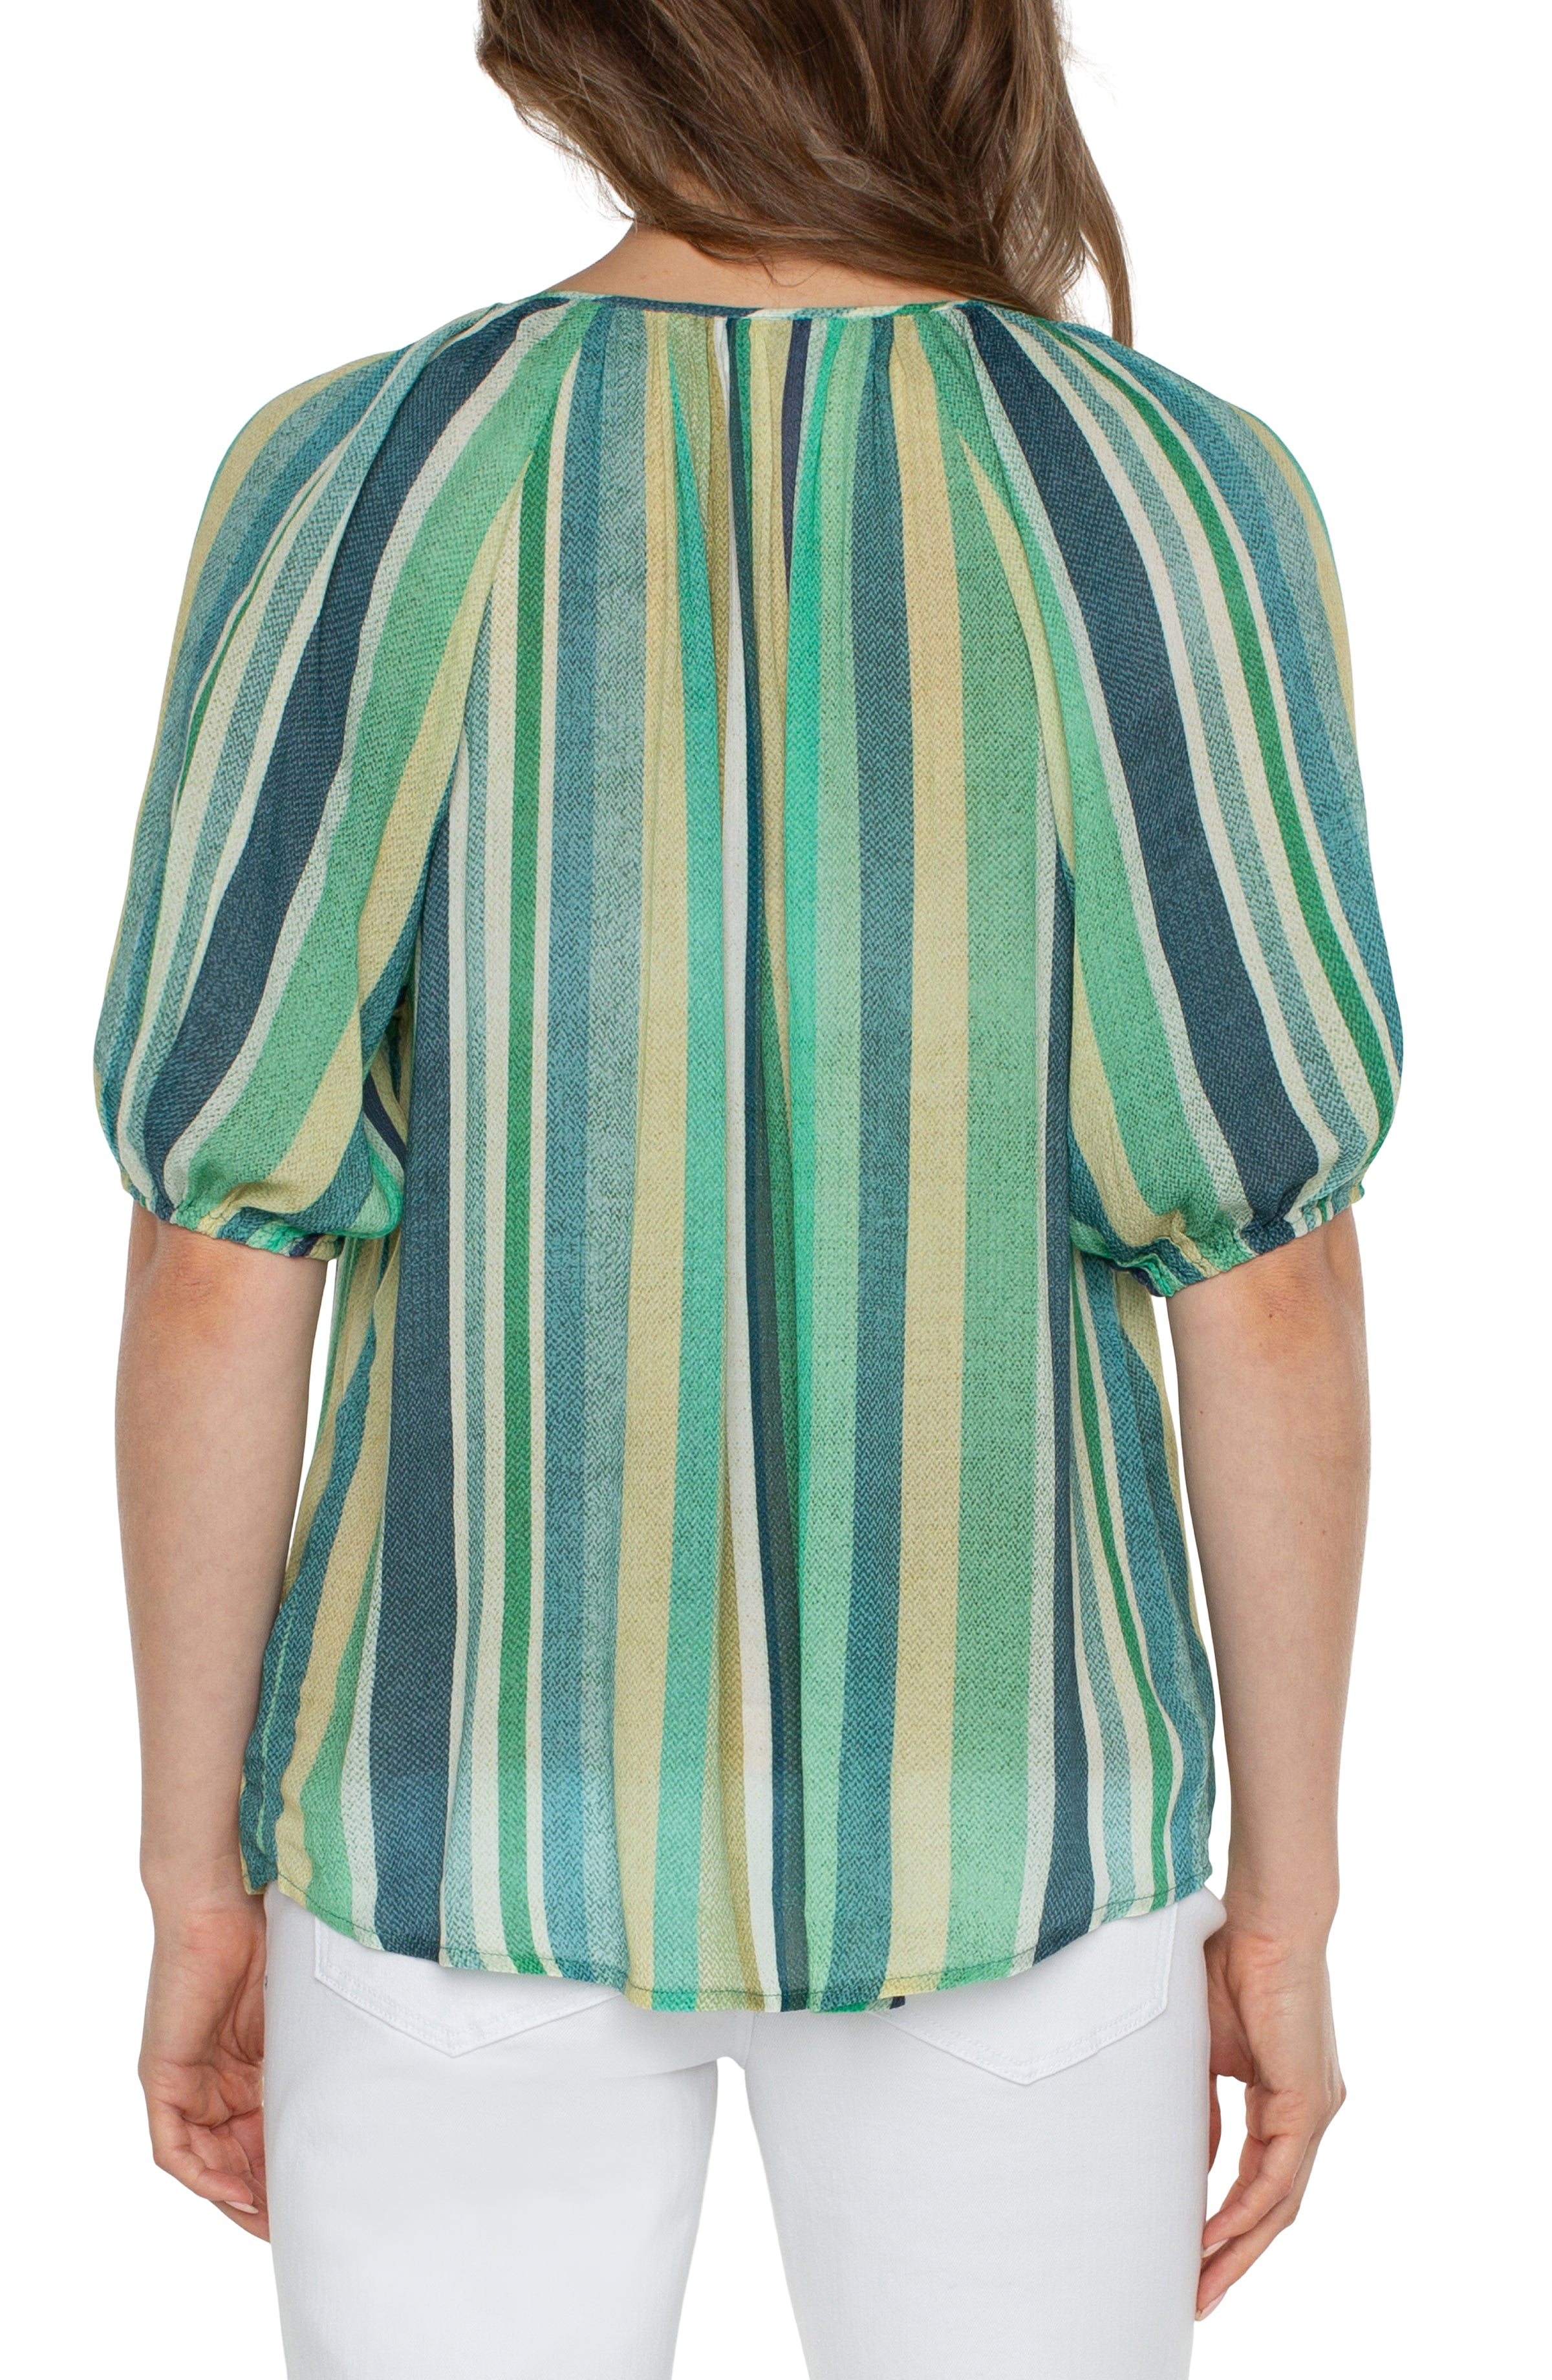 LVP Button Front Shirred Woven Blouse - Teal Multi Stripe back View